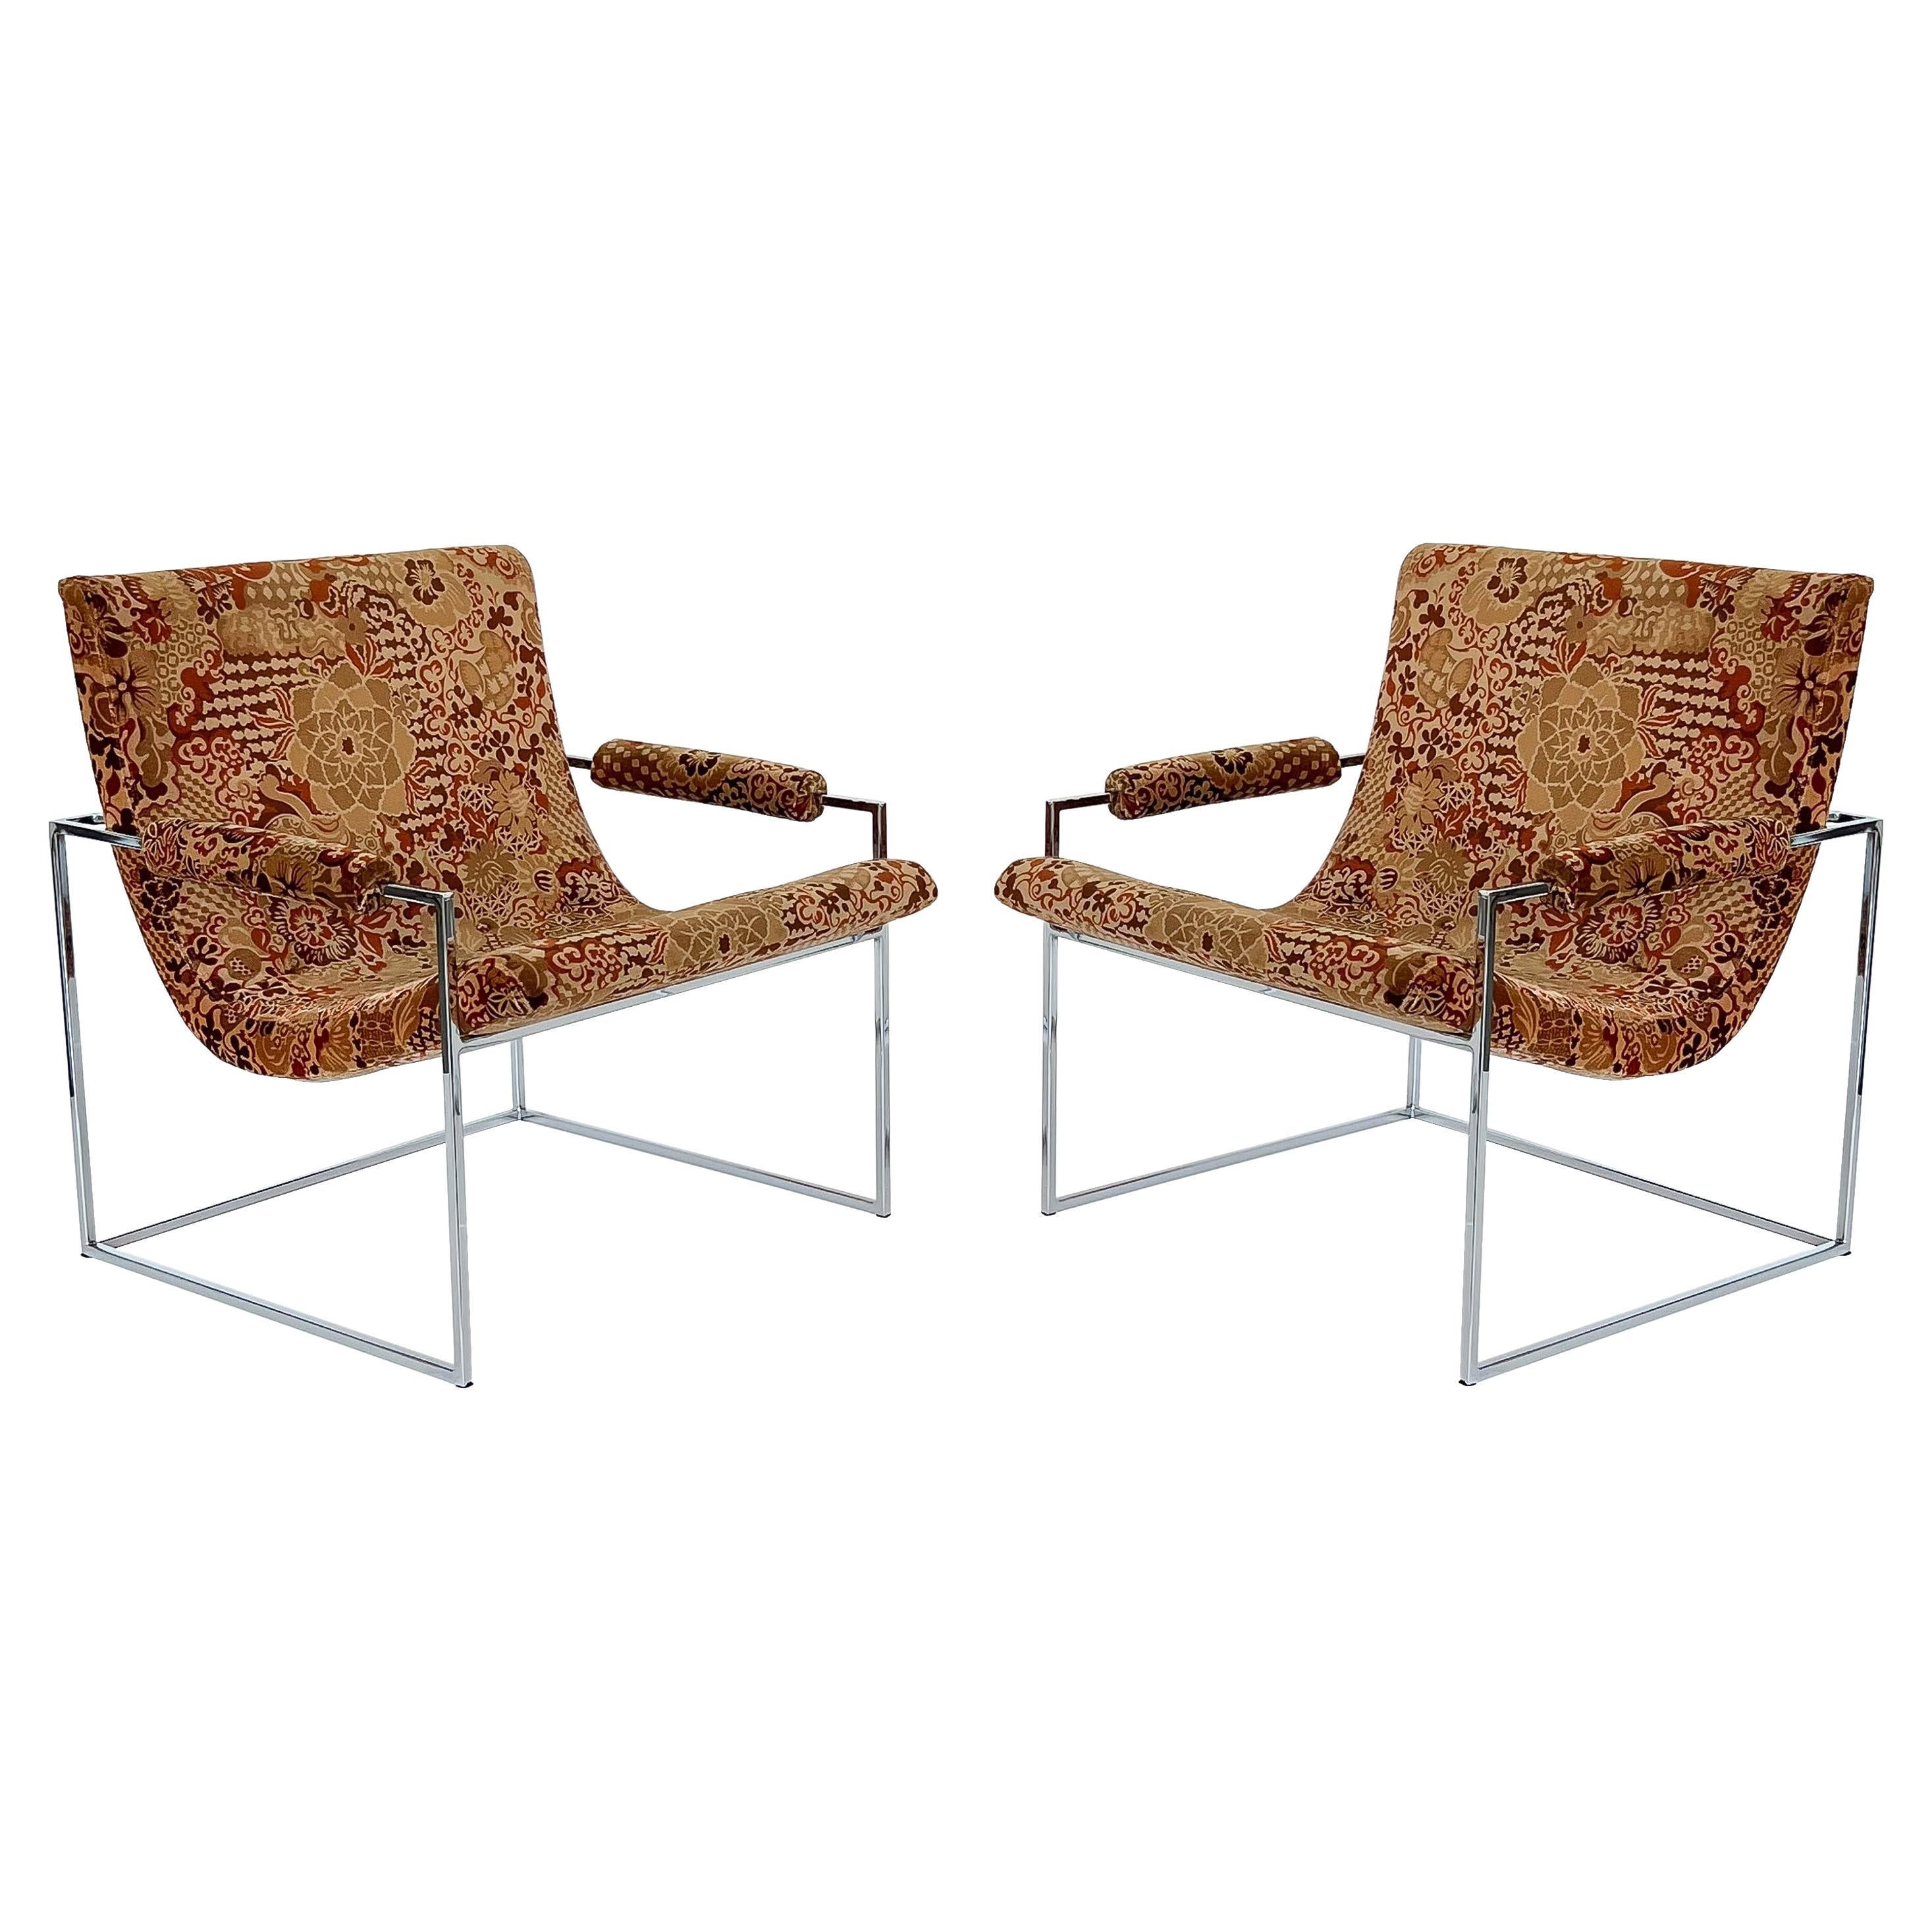 Pair of Milo Baughman Chrome Scoop Lounge Chairs for Thayer Coggin